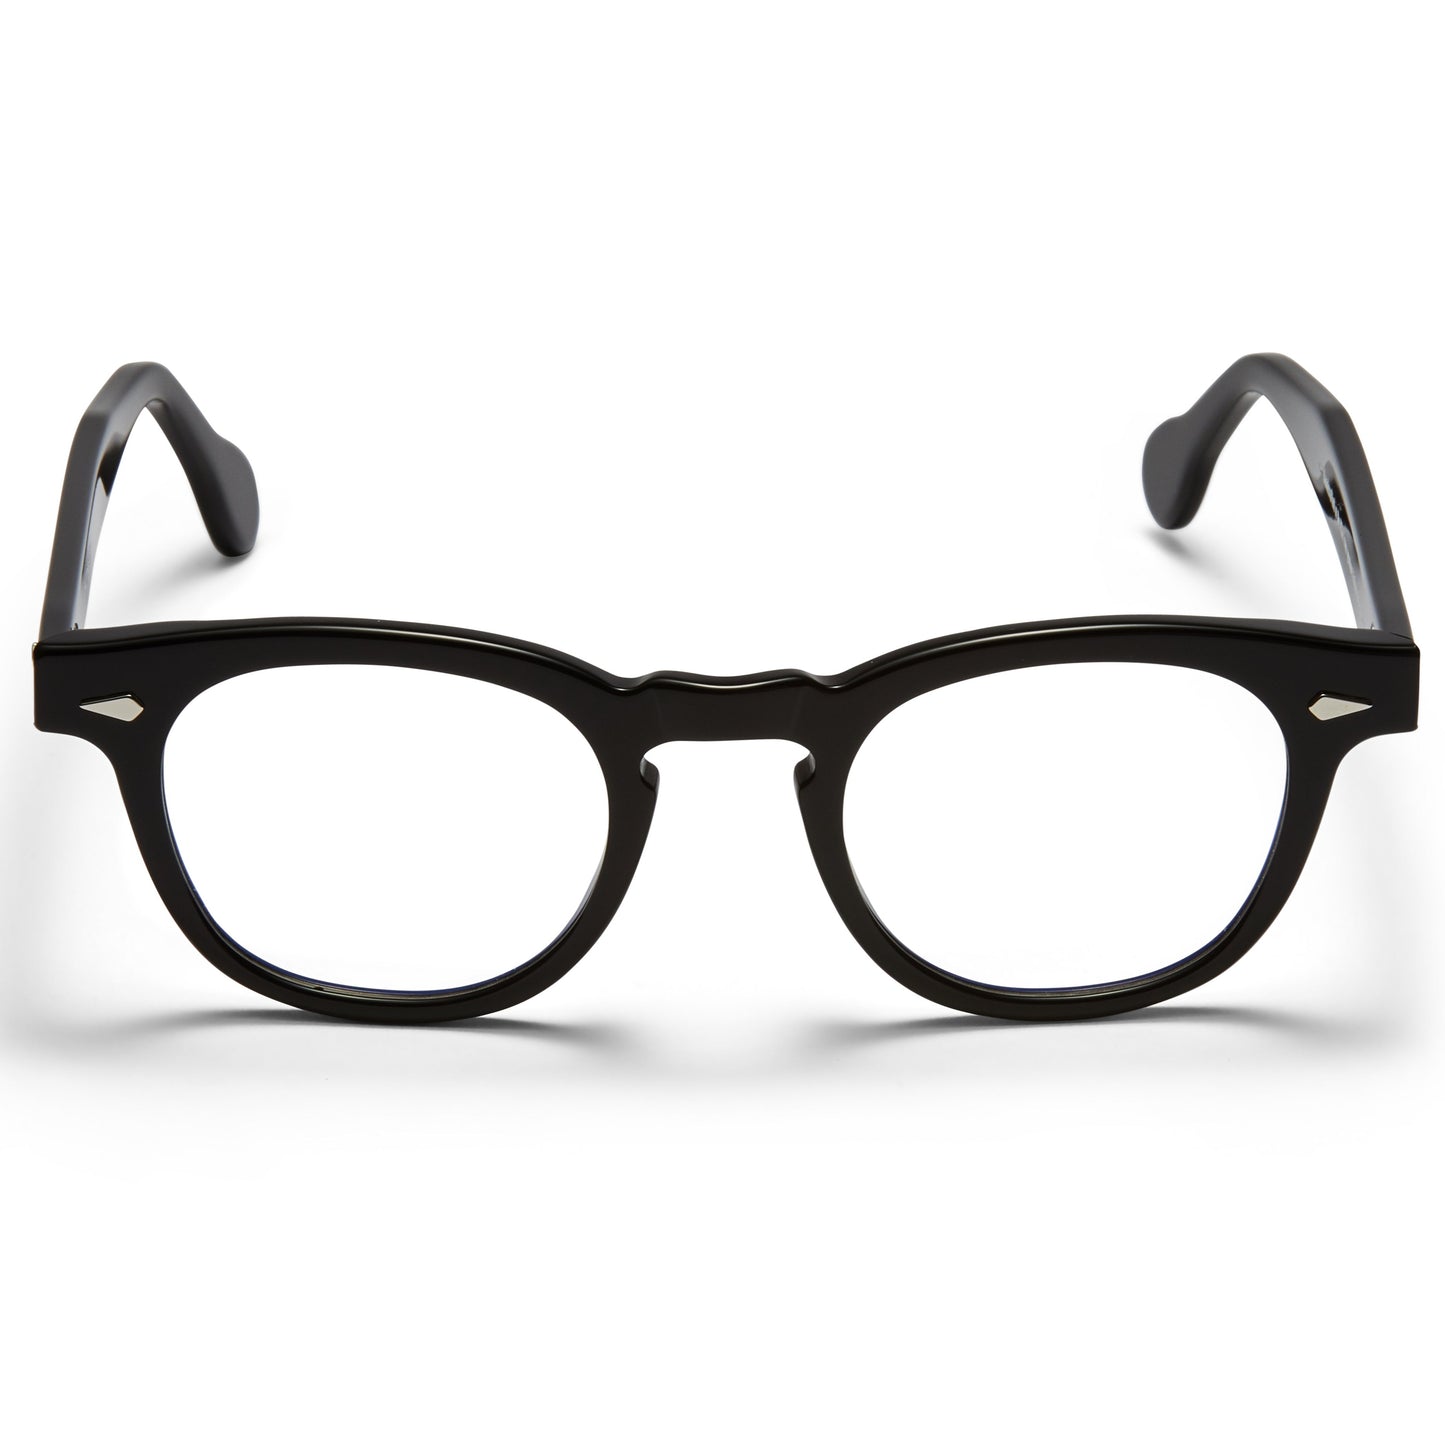 A front view of the Arnel USA frame—the Vintage eyewear. 